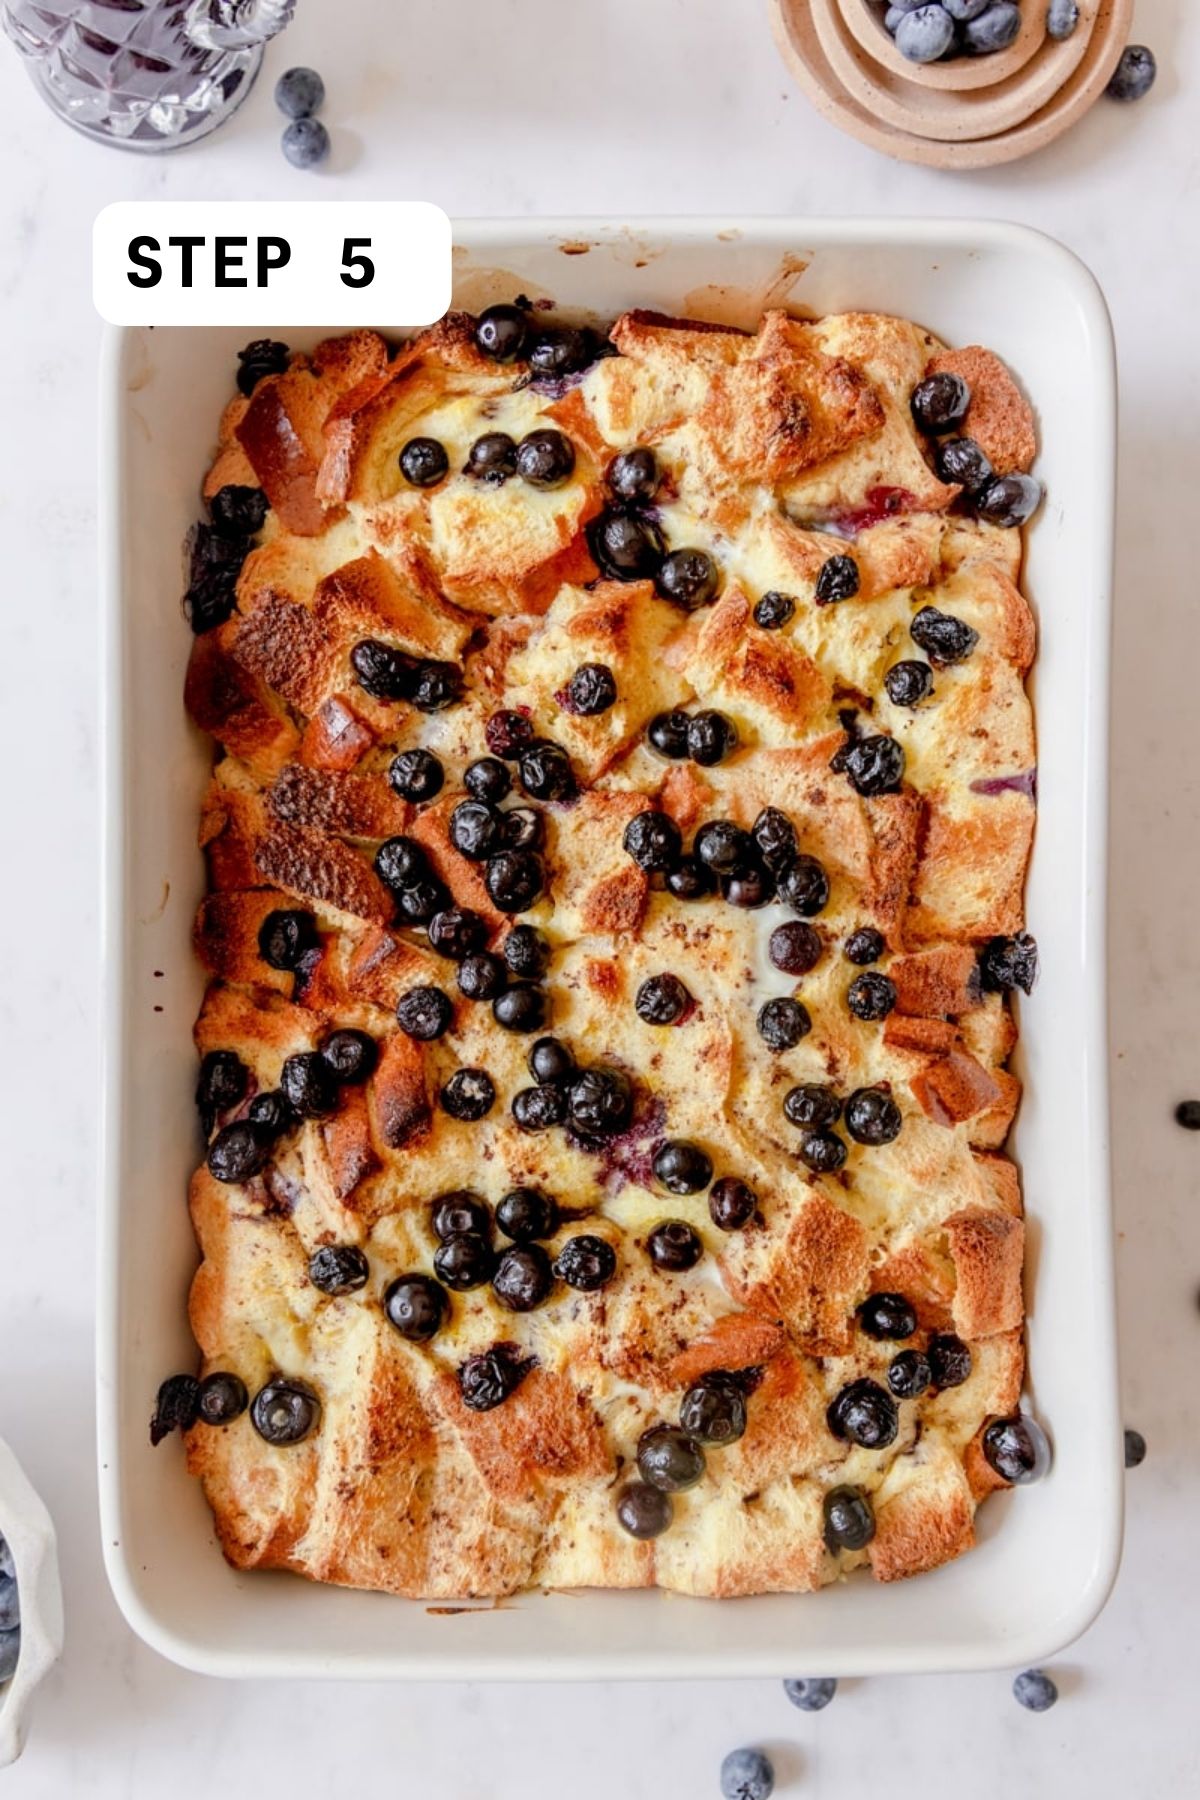 Baked brioche casserole topped with blueberries. 